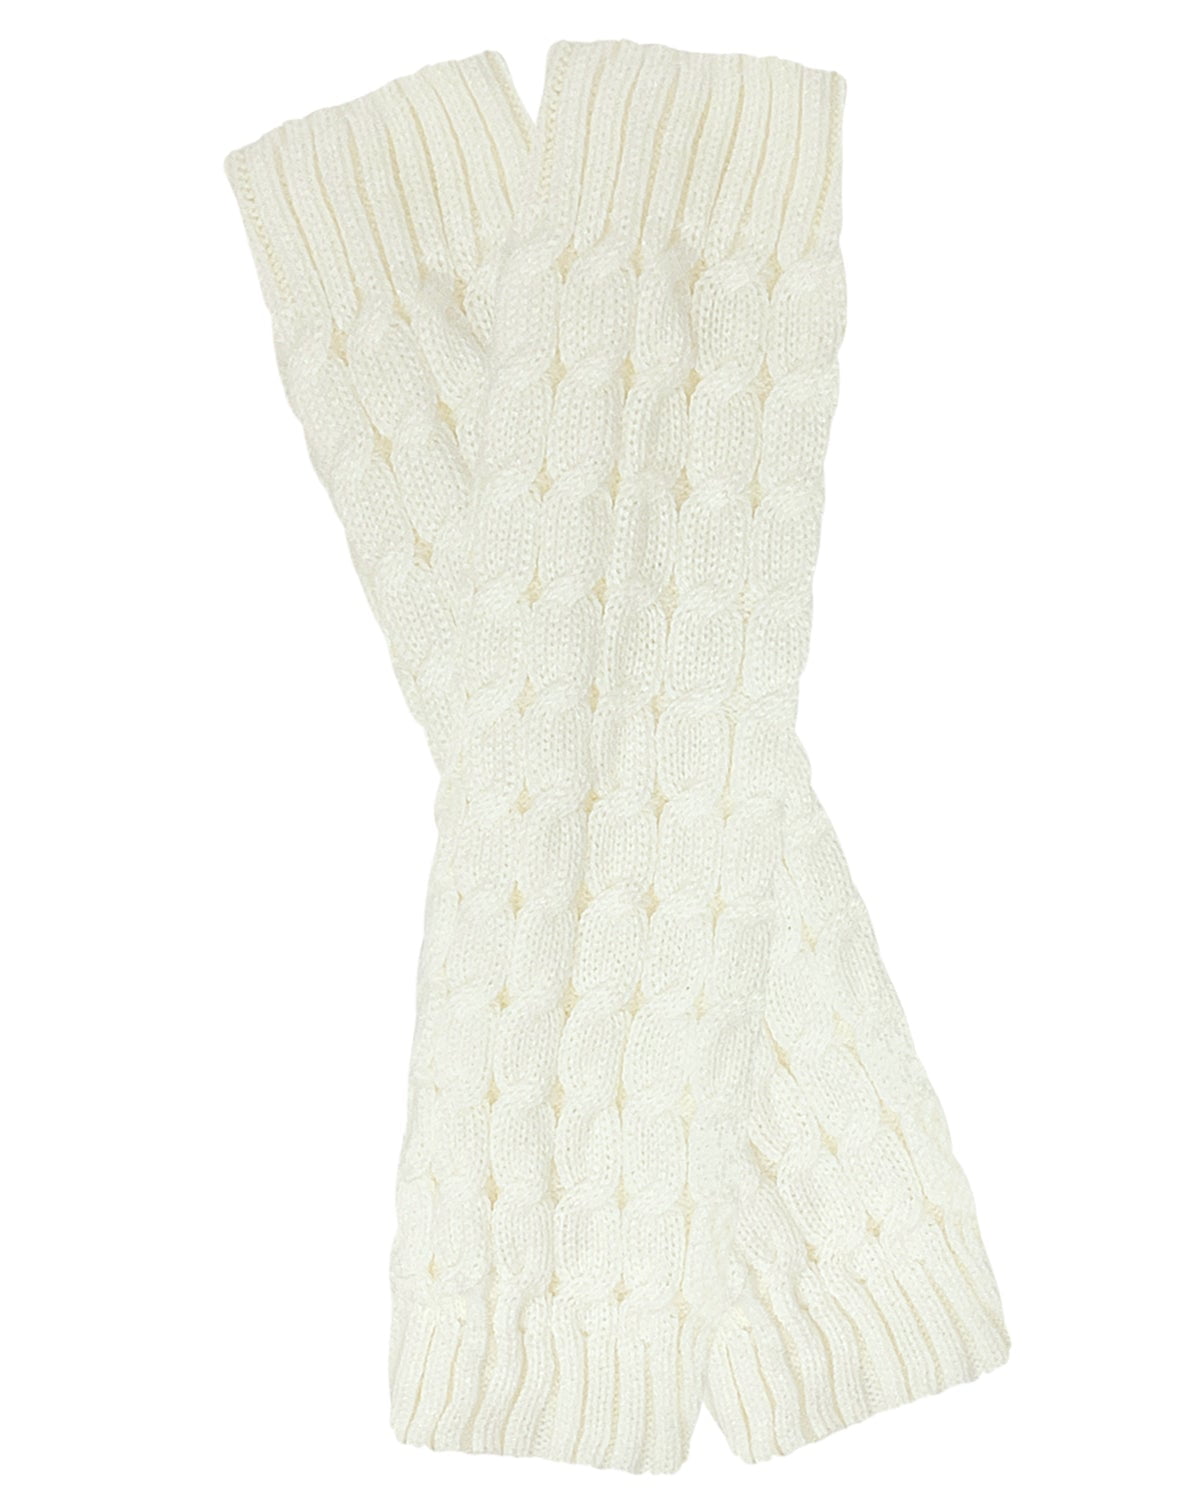 Wrapables Women's Cable Knit Leg Warmers, Cream